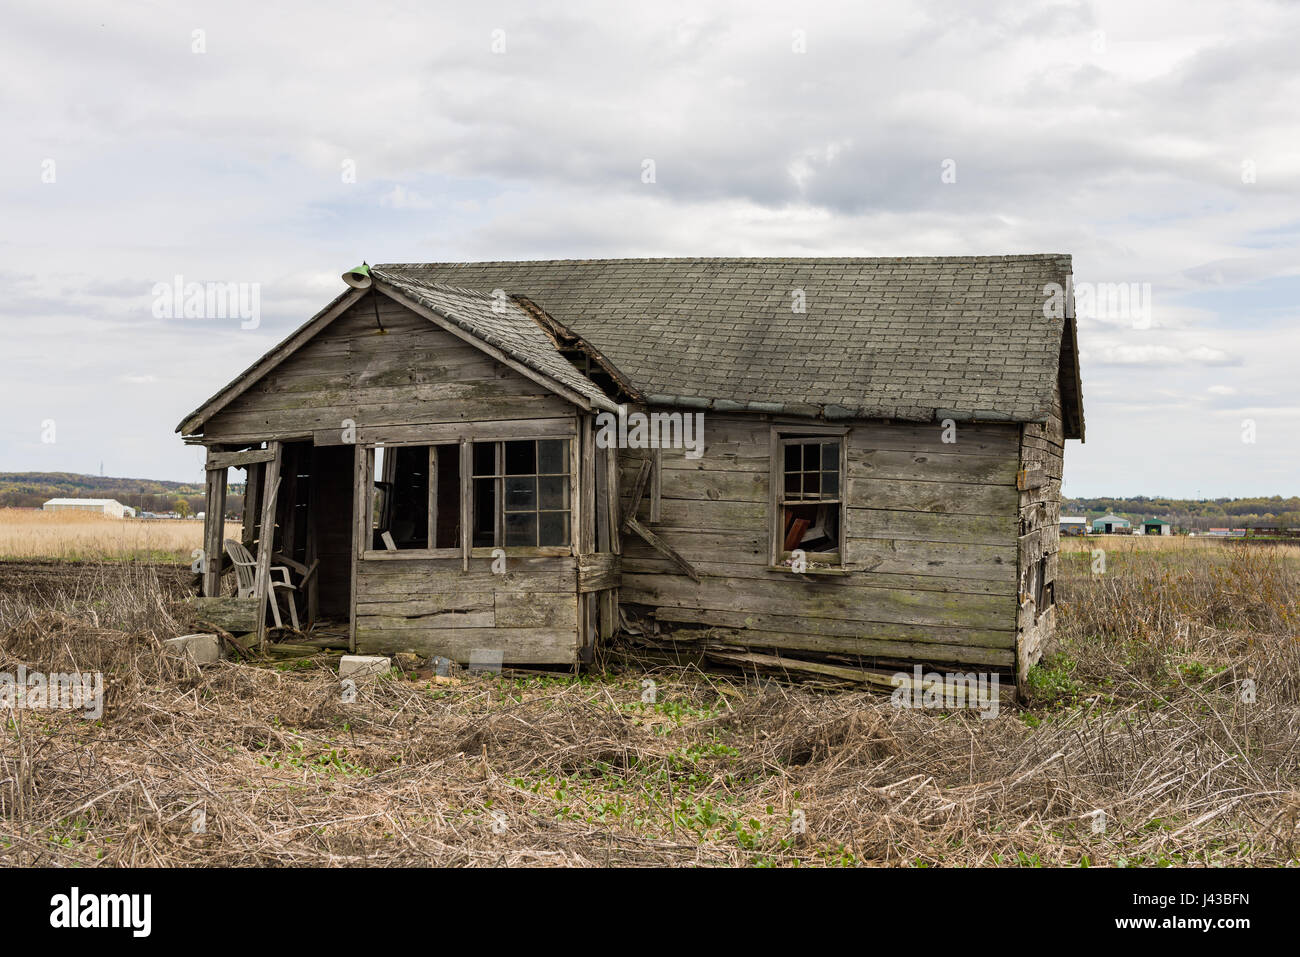 Old Wooden Farm House In A Dilapidated State, Ontario, Canada Stock Photo